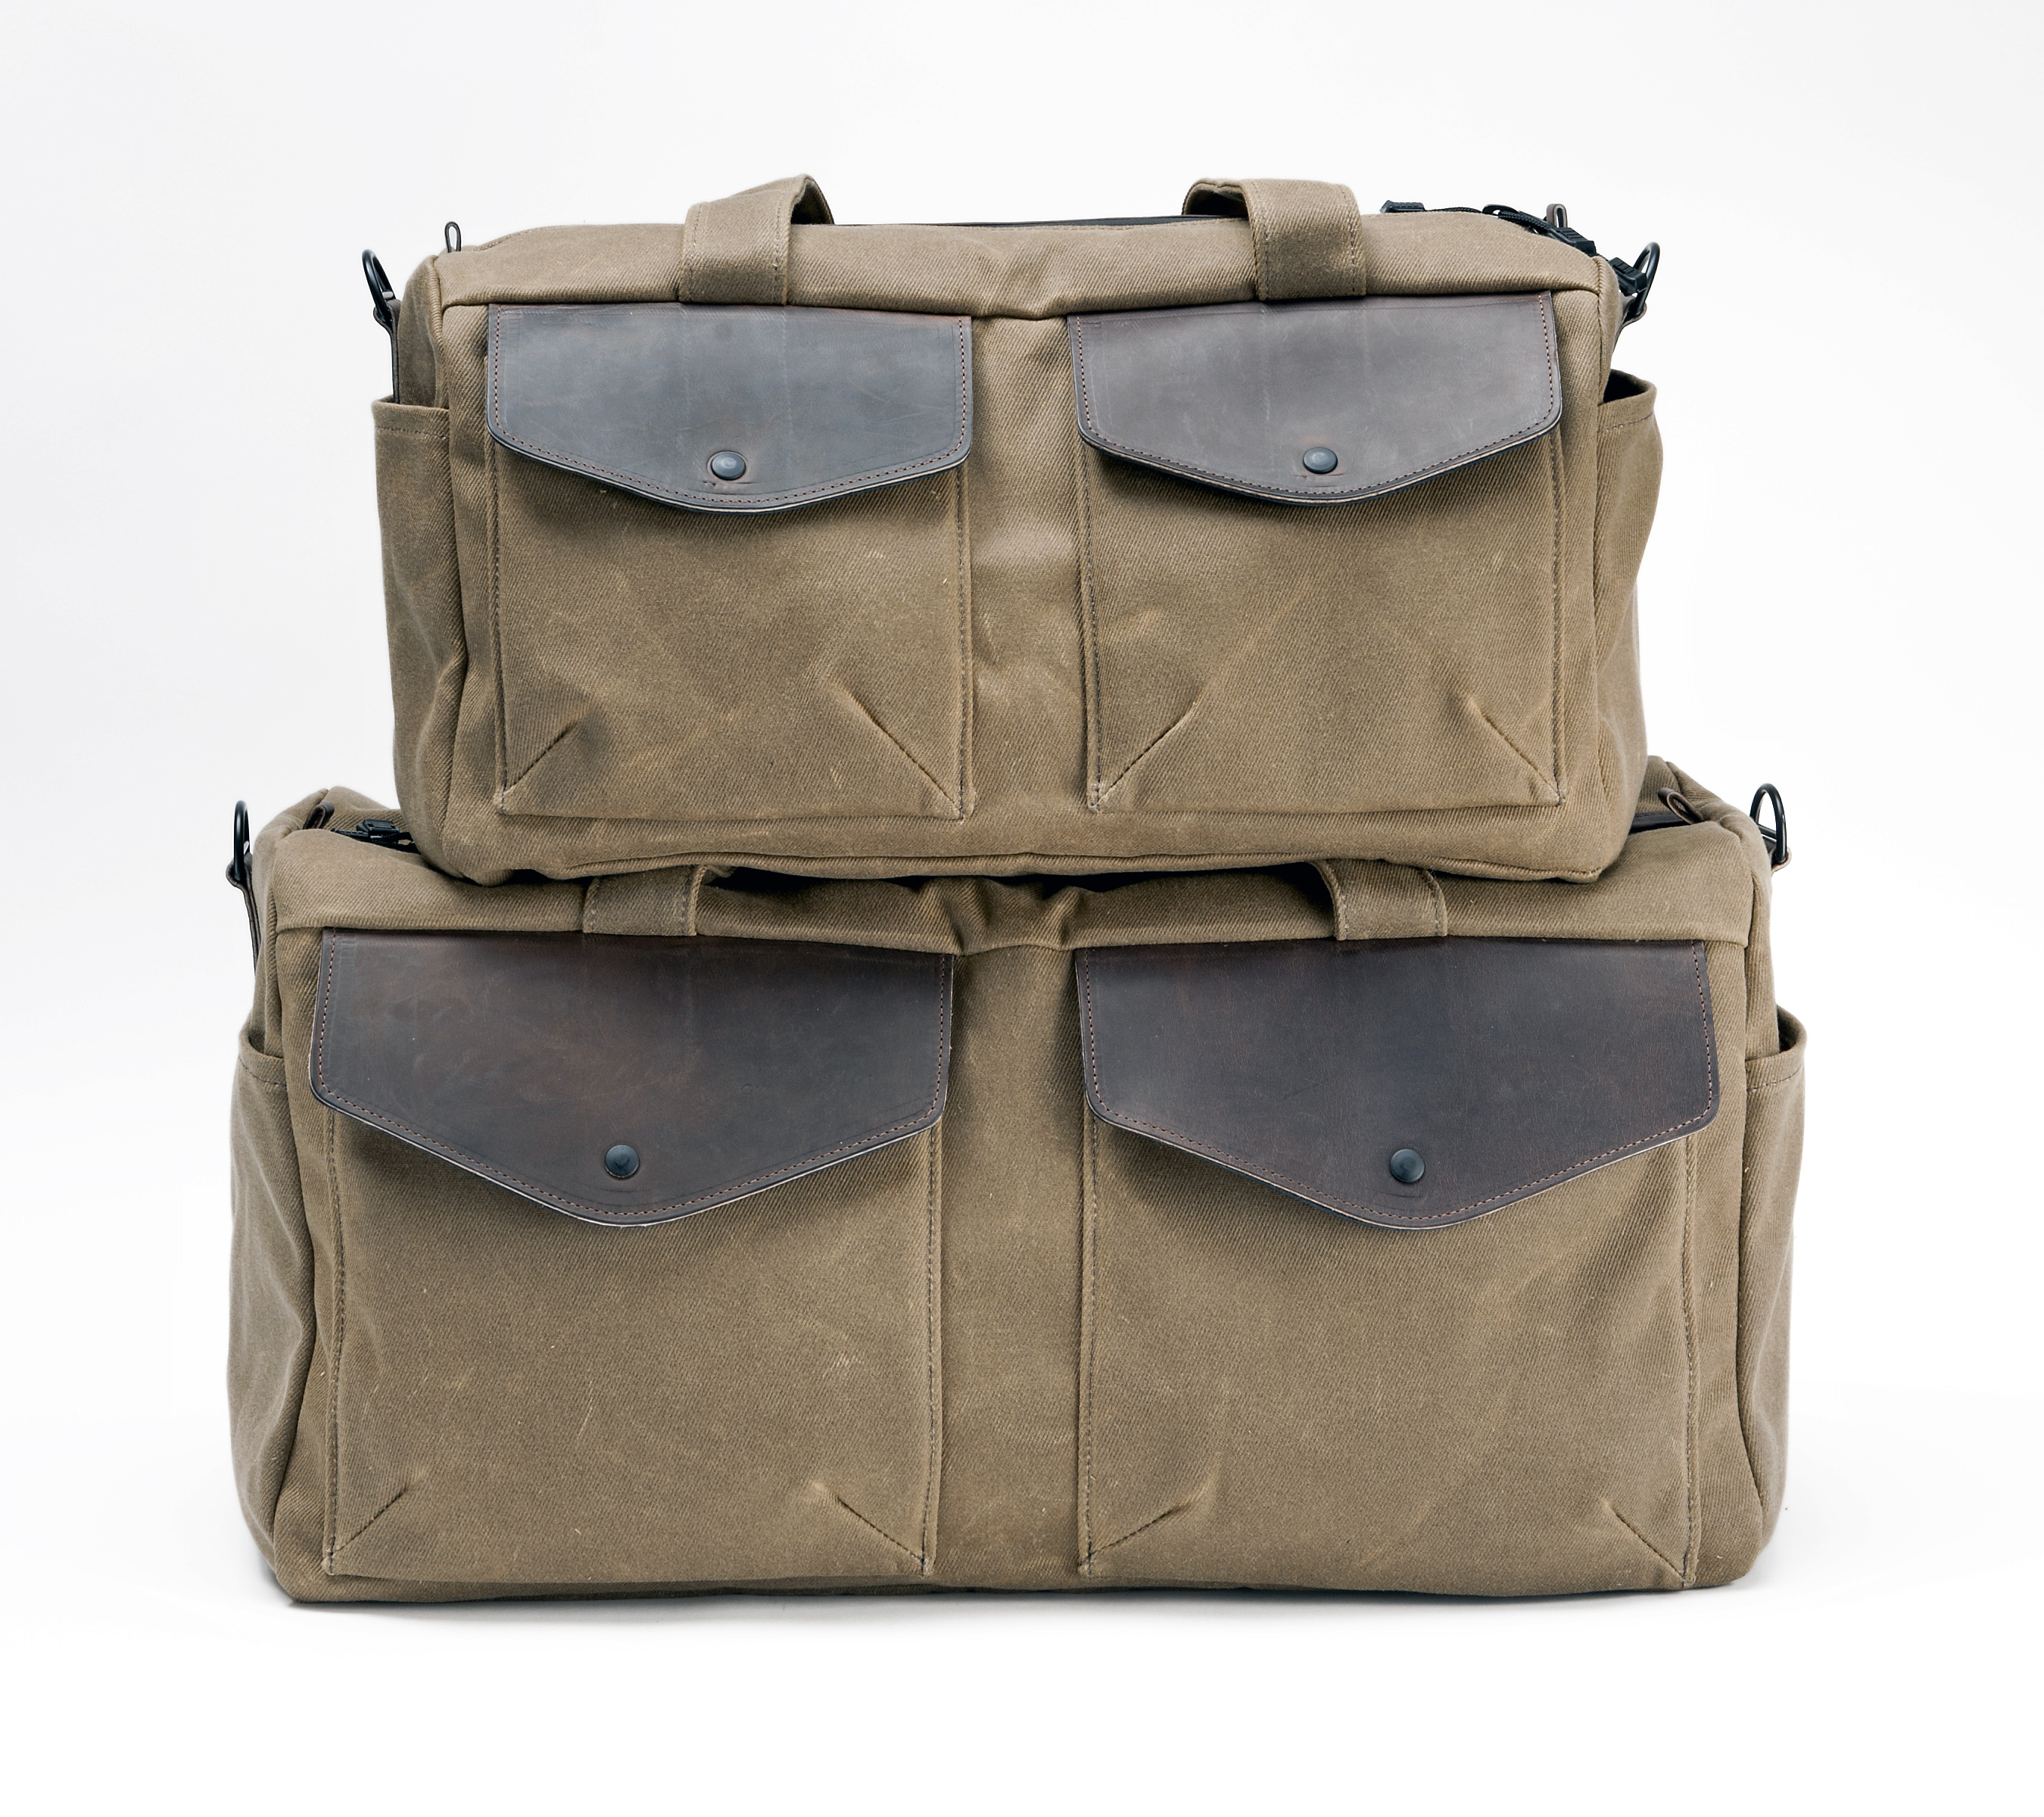 The Outback Duffel